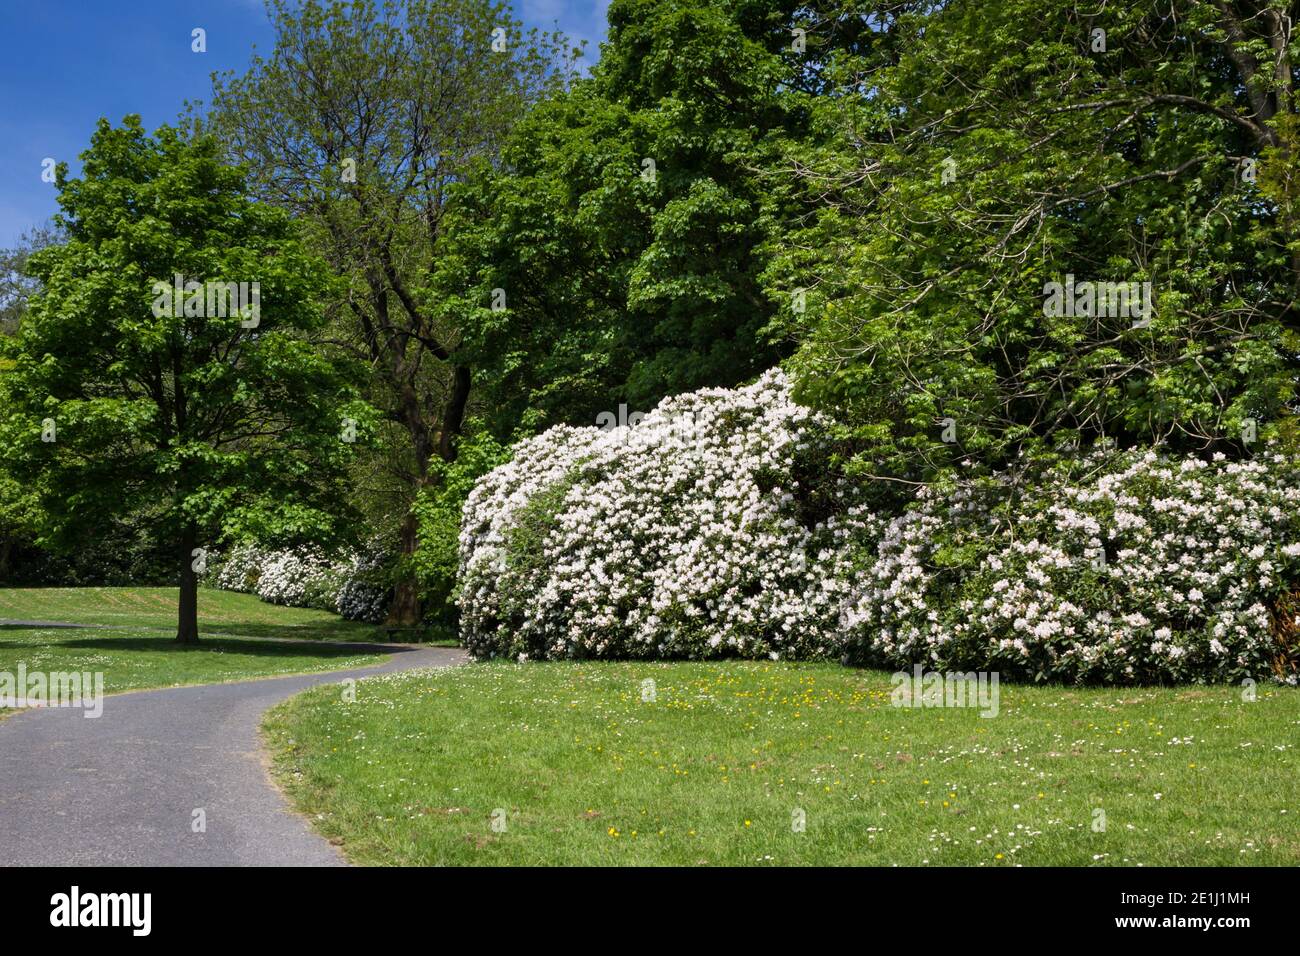 Rhododendron bushes with white flowers fringe a small wooded area in Whitaker Park, off Haslingden Road, Rawtenstall, Lancashire on a sunny spring day Stock Photo